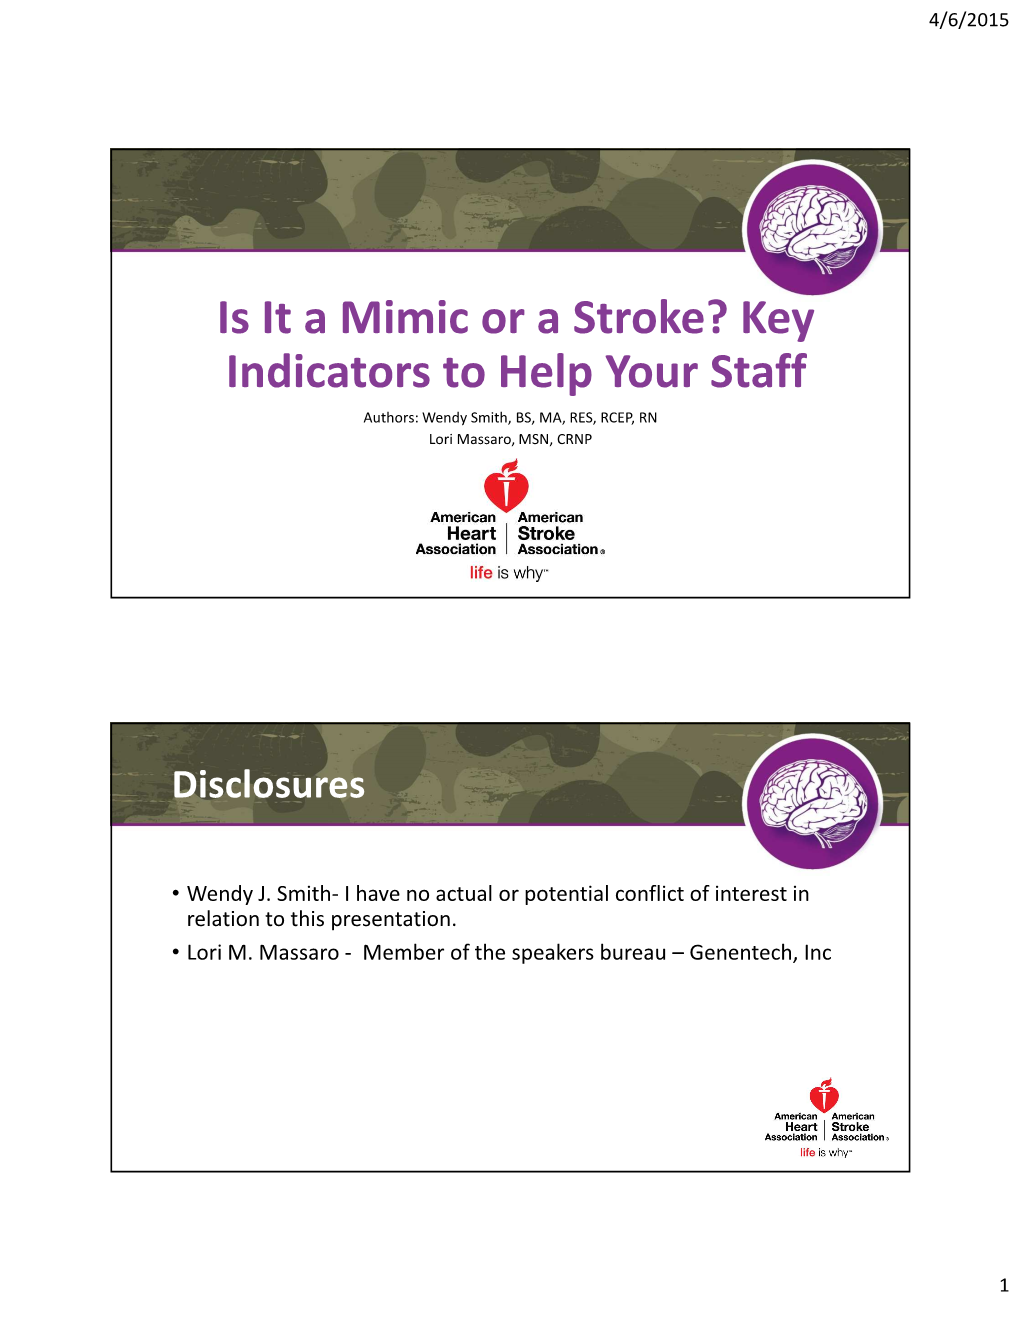 Is It a Mimic Or a Stroke- Key Indicators to Help Your Staff